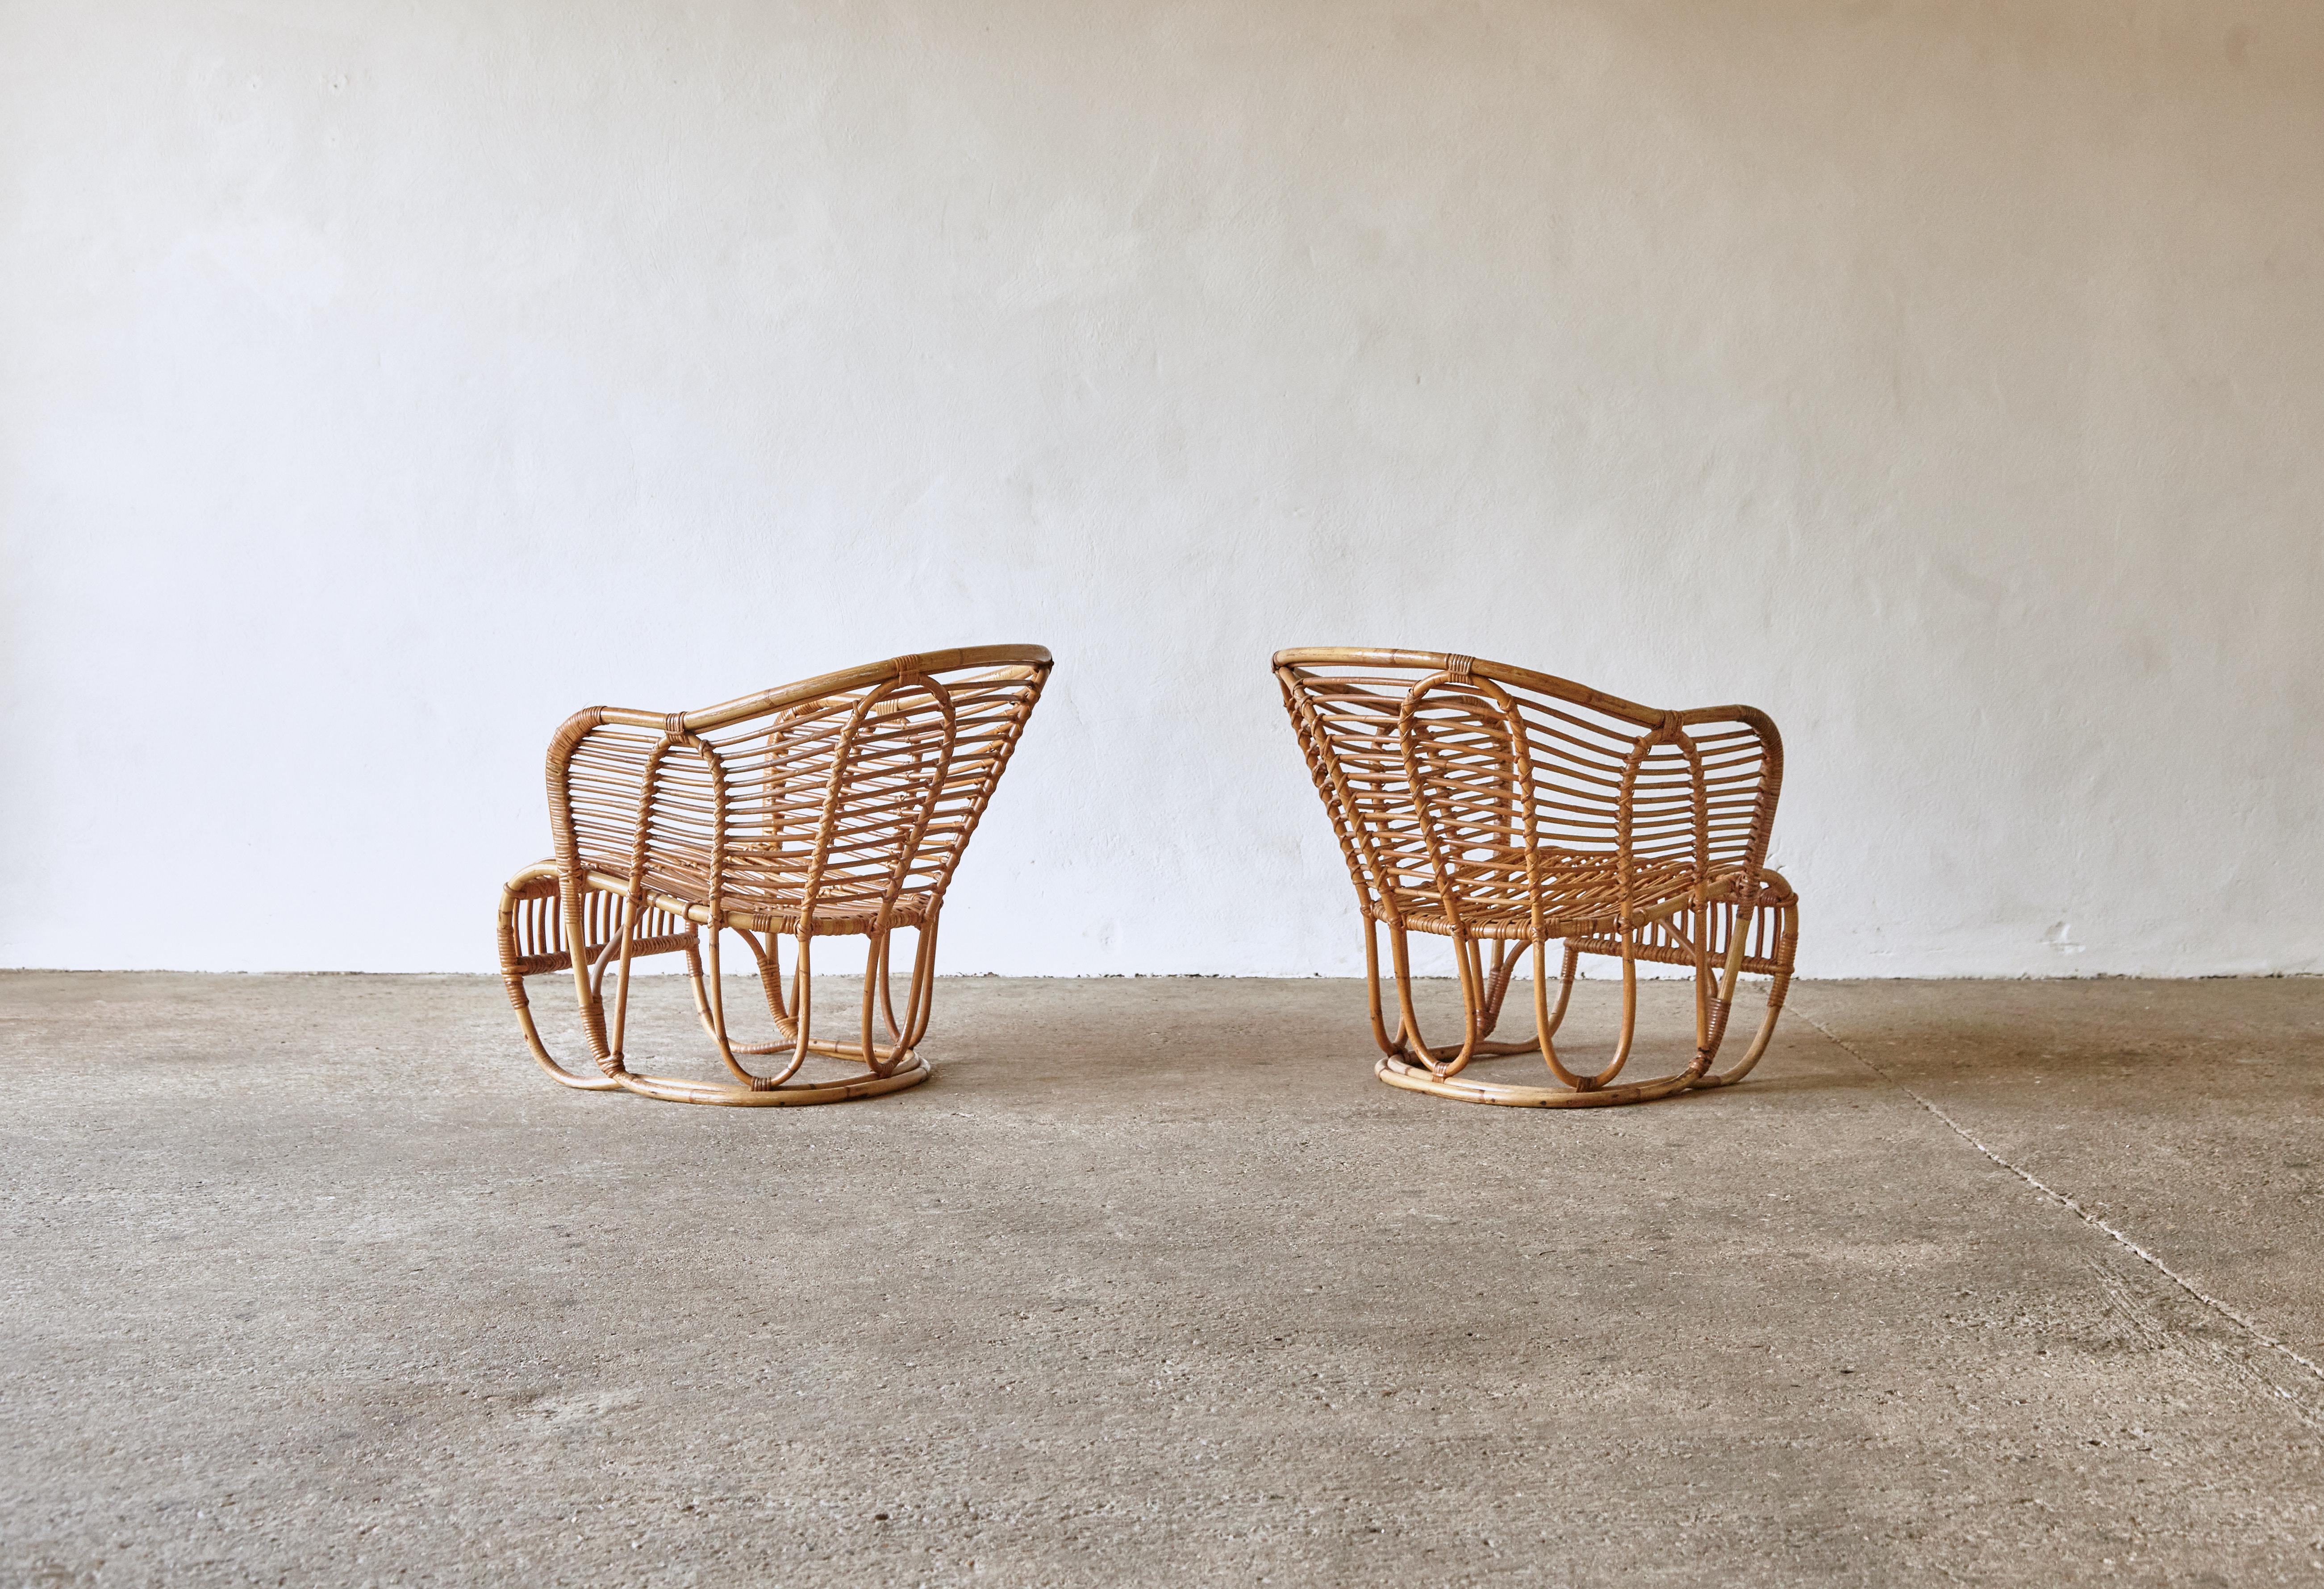 Pair of graceful Tove & Edvard Kindt-Larsen Model 3446 bamboo and rattan chairs, produced by Robert Wengler, Copenhagen, Denmark, 1940s. Designed by Kindt-Larsen for the Danish Pavilion at the New York Expo of 1939. Good original condition with some